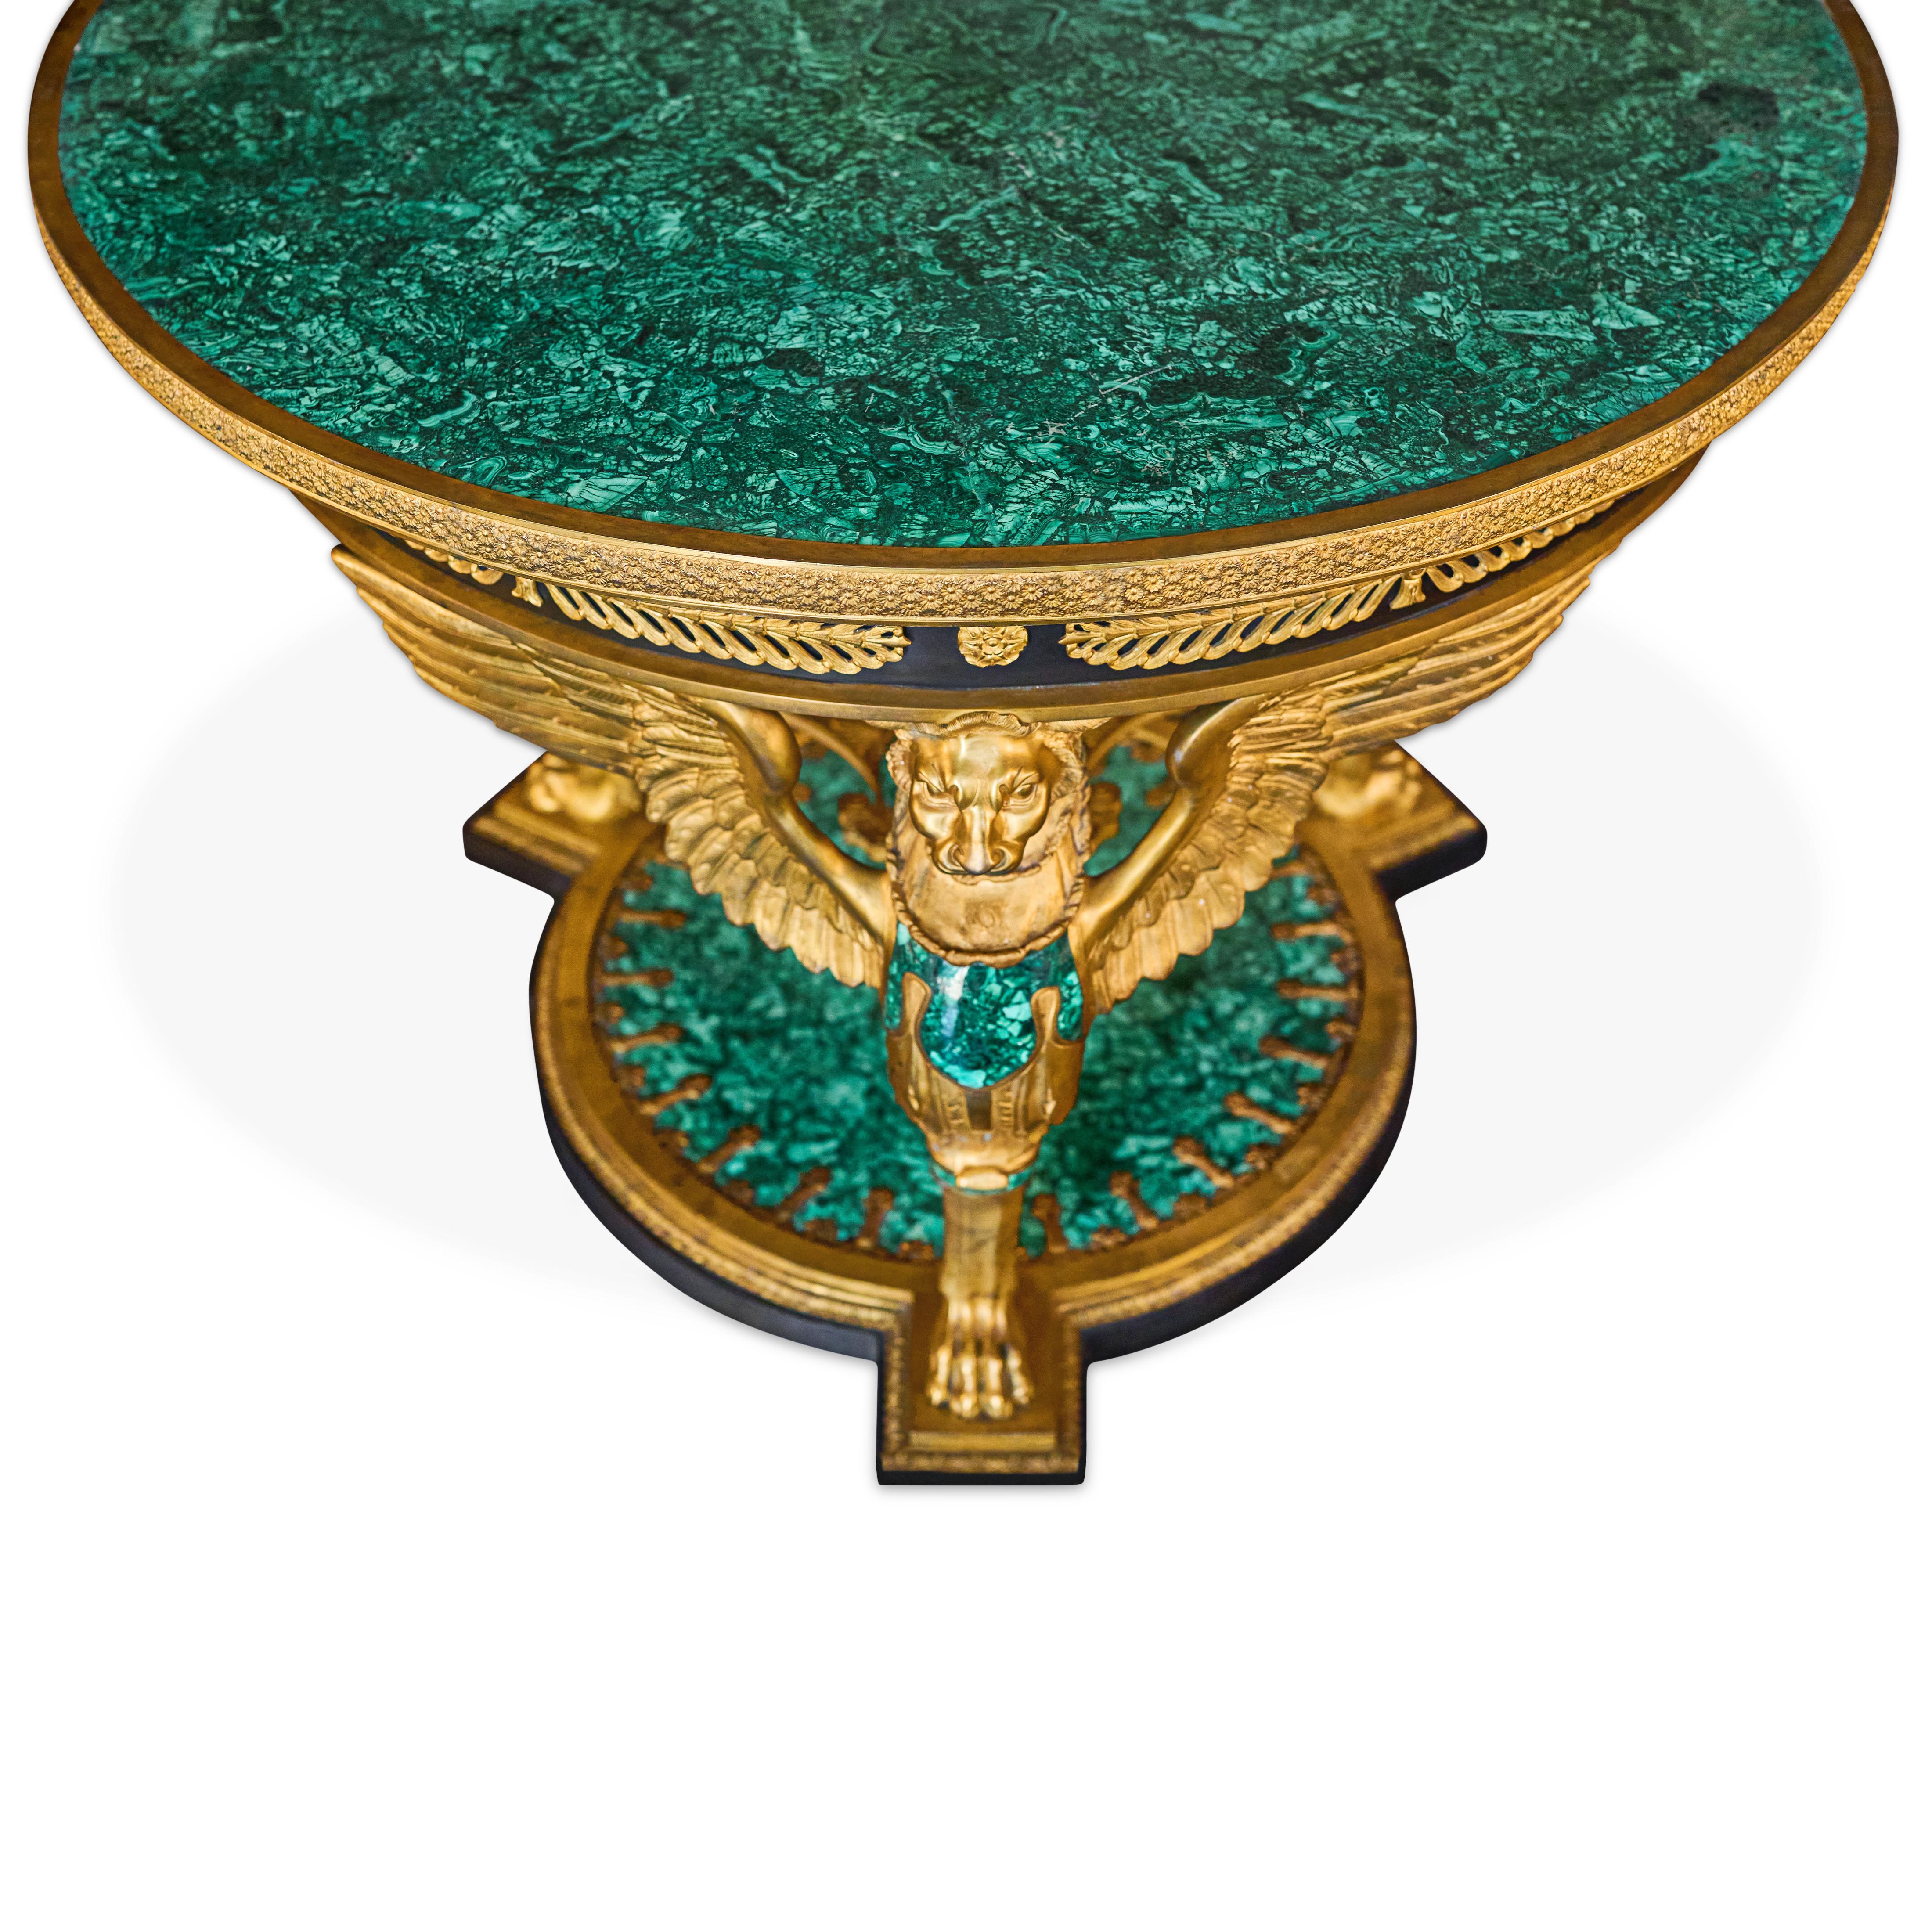 Empire Style Ormolu and Malachite Center Table For Sale 3